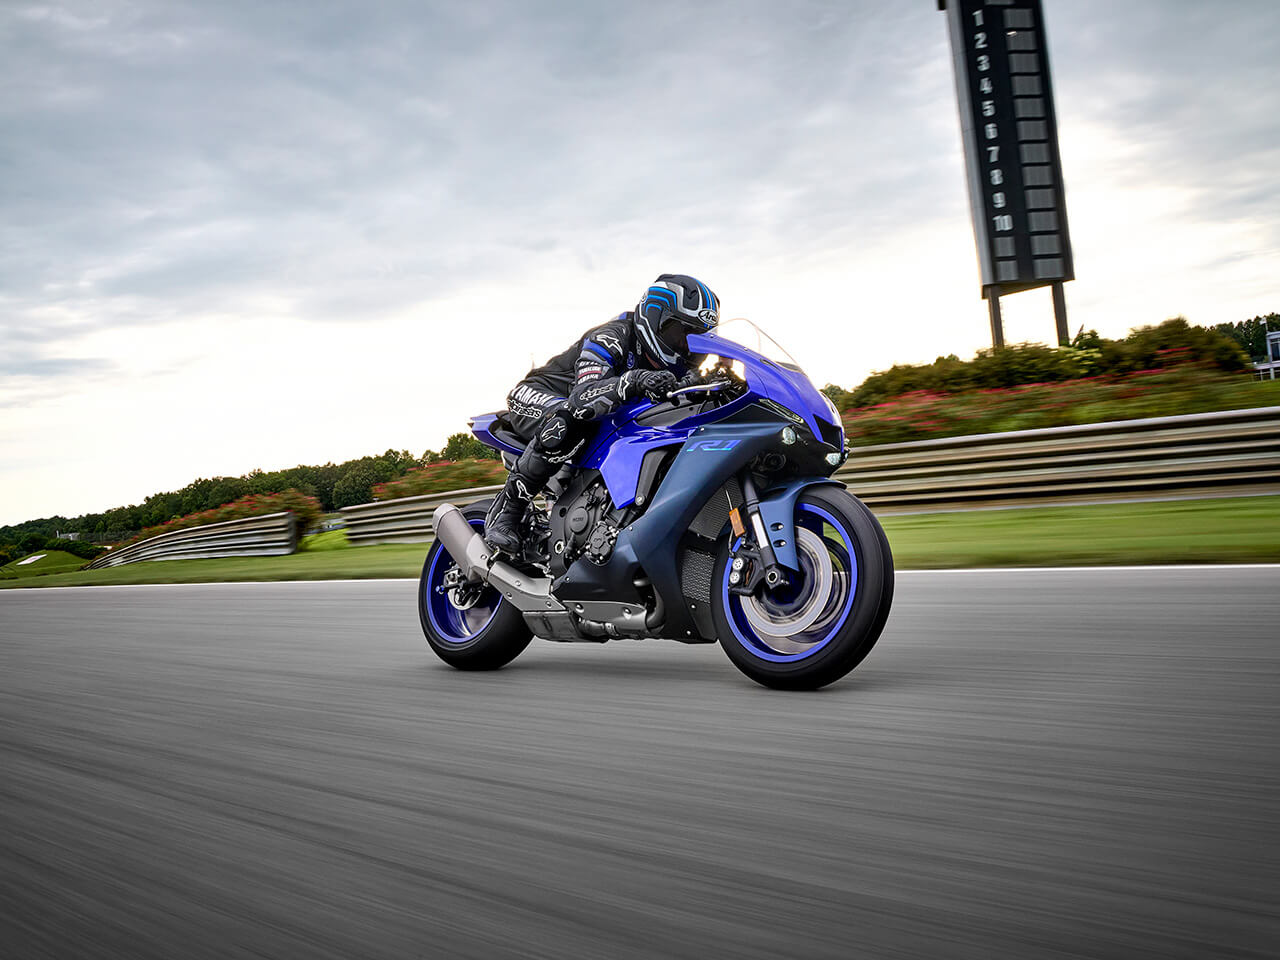  A Yamaha R1 motorcycle from 2023 on track